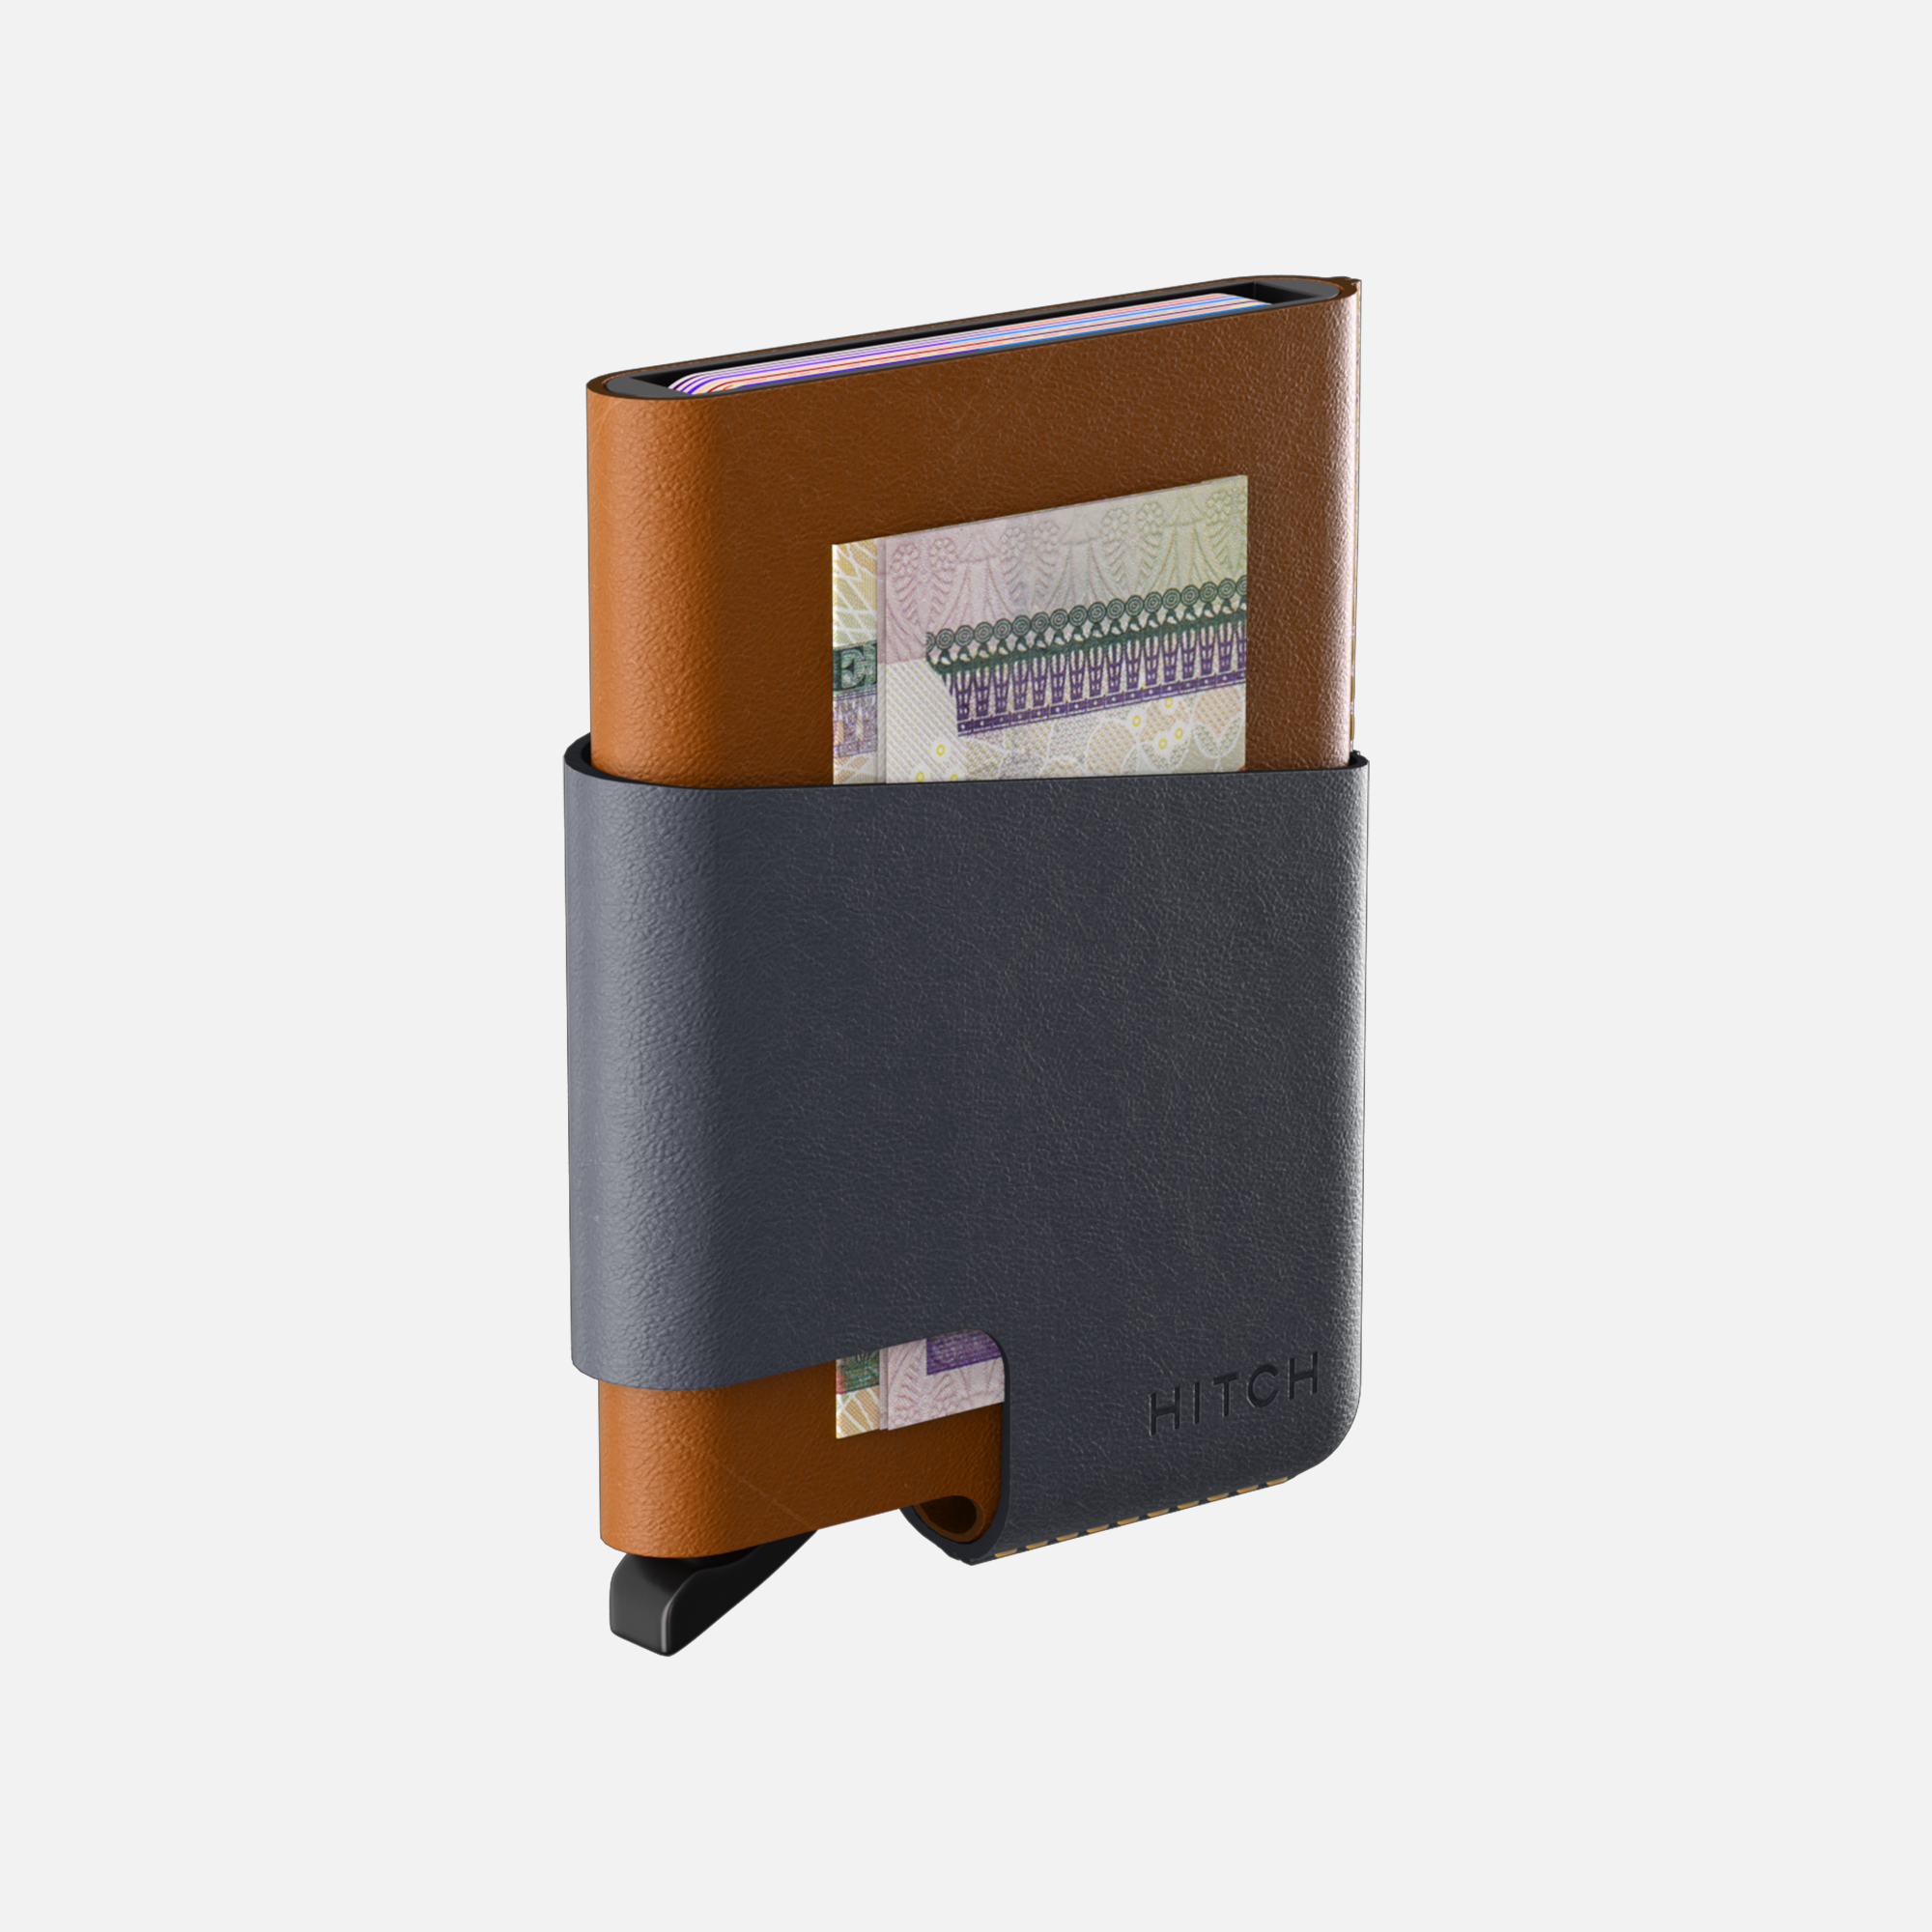 Brown and black leather cardholder wallet with cash peeking out against a white background.